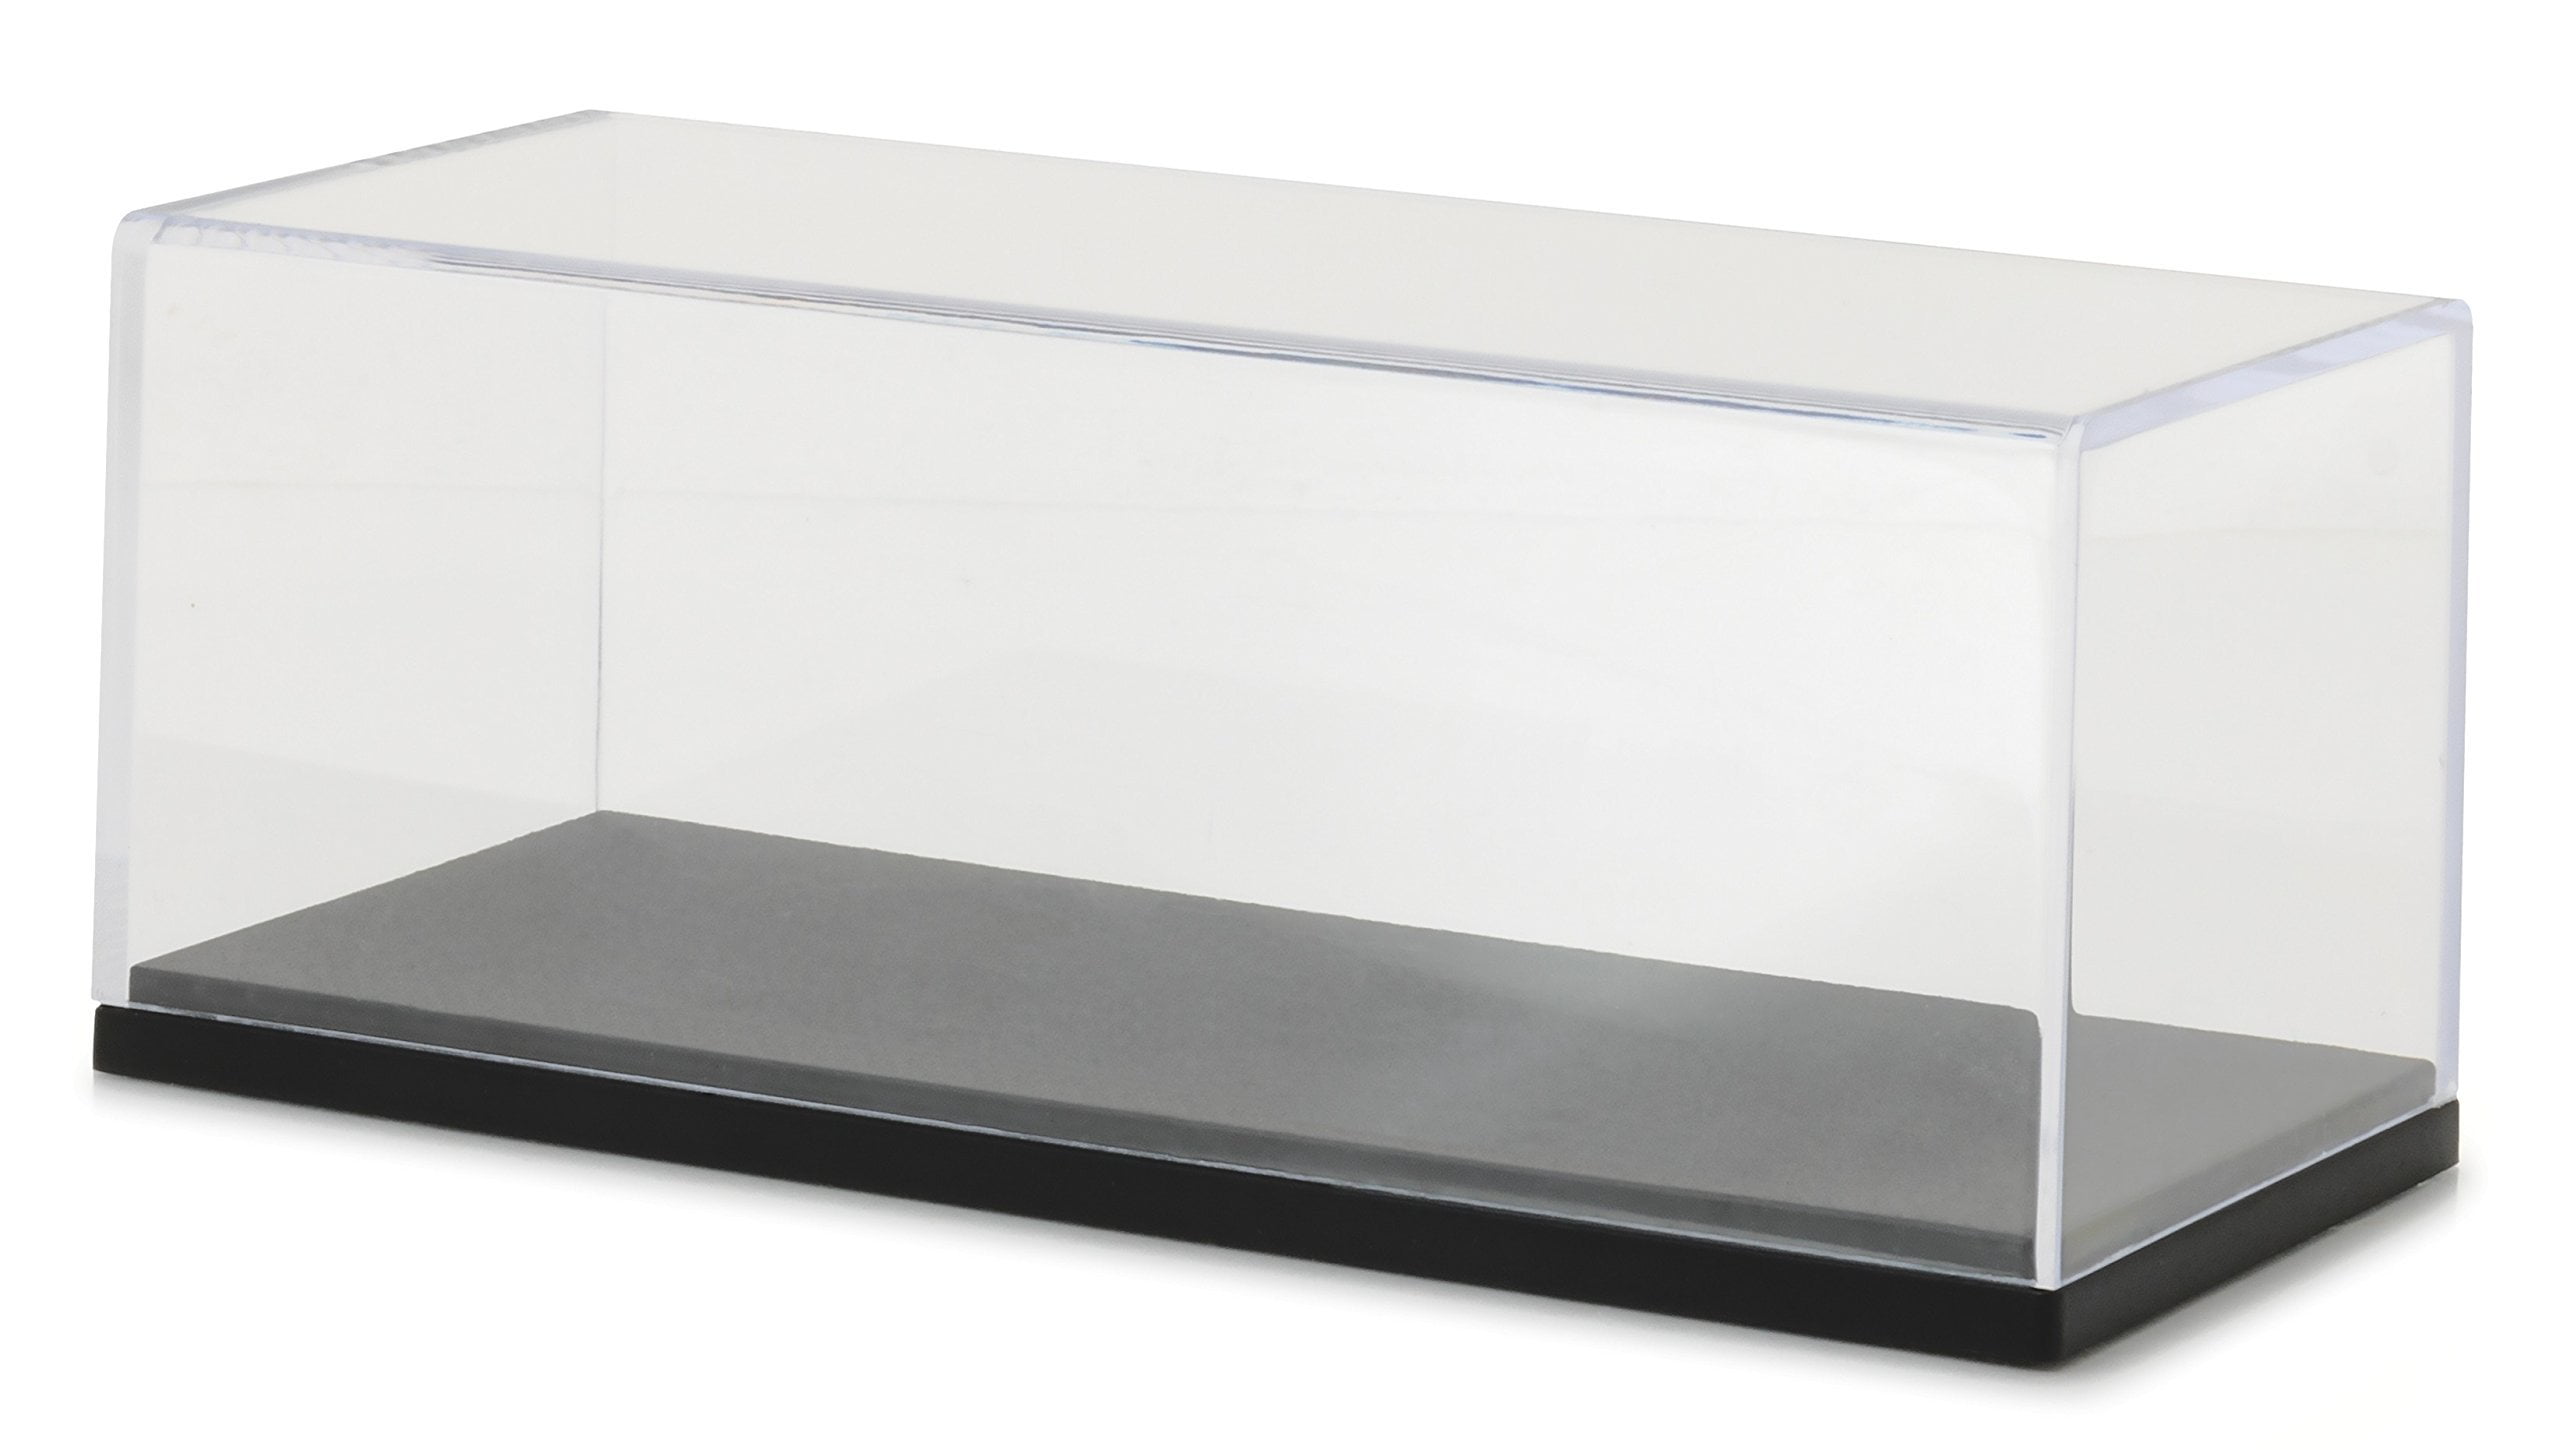 Acrylic Display Show Case with Plastic Base For 1/18 Scale Cars by Greenlight 